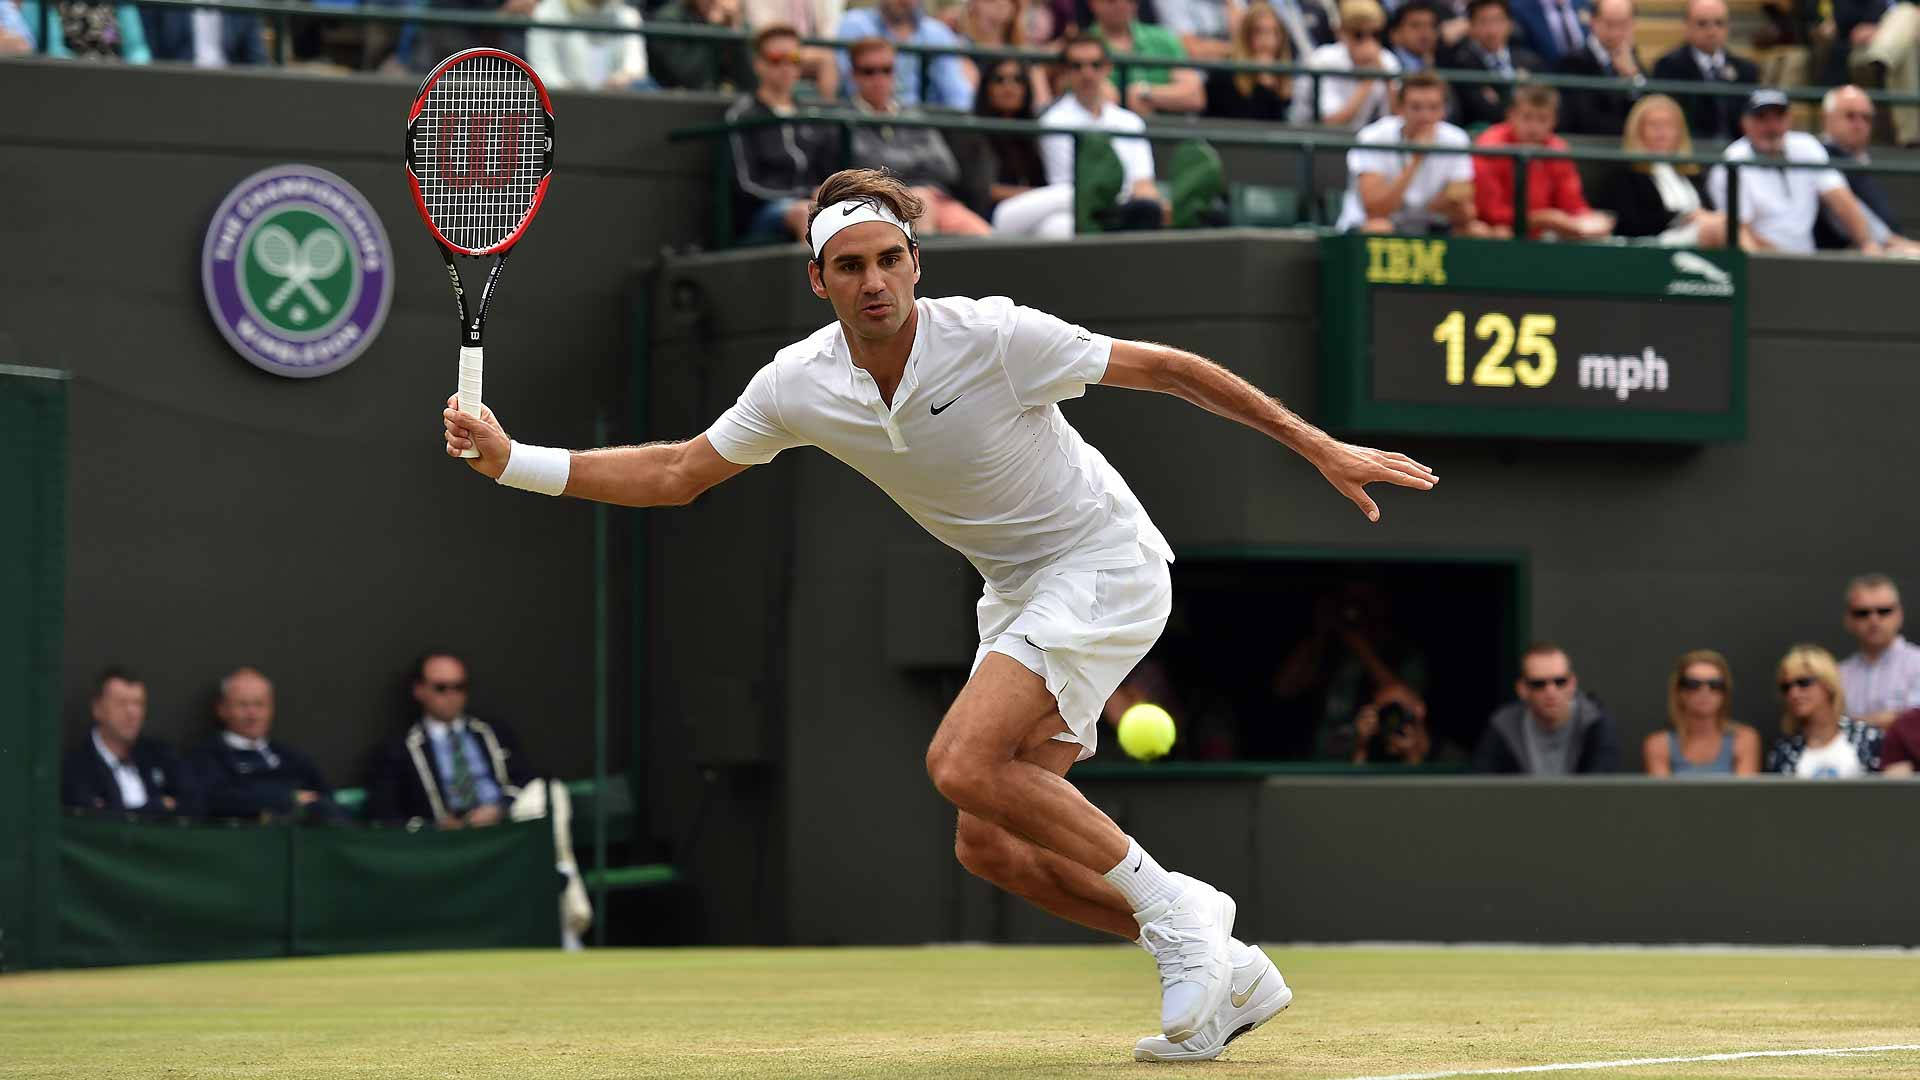 Caption: Roger Federer In Action At The Iconic Wimbledon Court Background